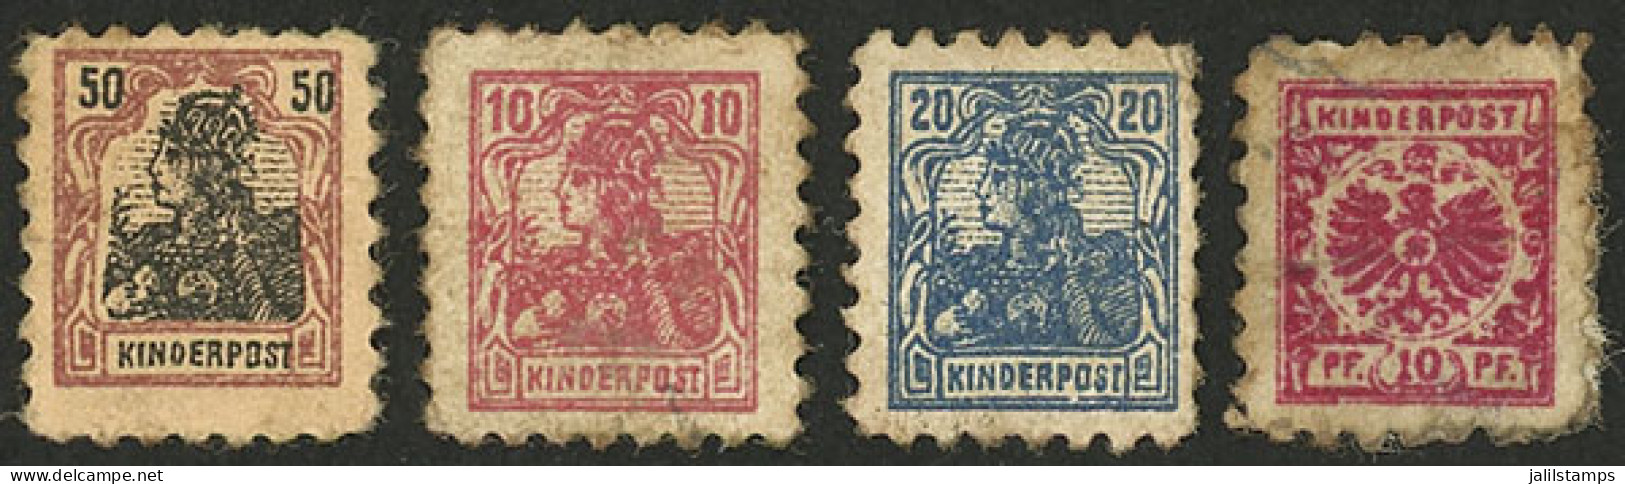 GERMANY: KINDERPOST: 4 Very Small Stamps, Minor Defects, Very Interesting! - Vignetten (Erinnophilie)